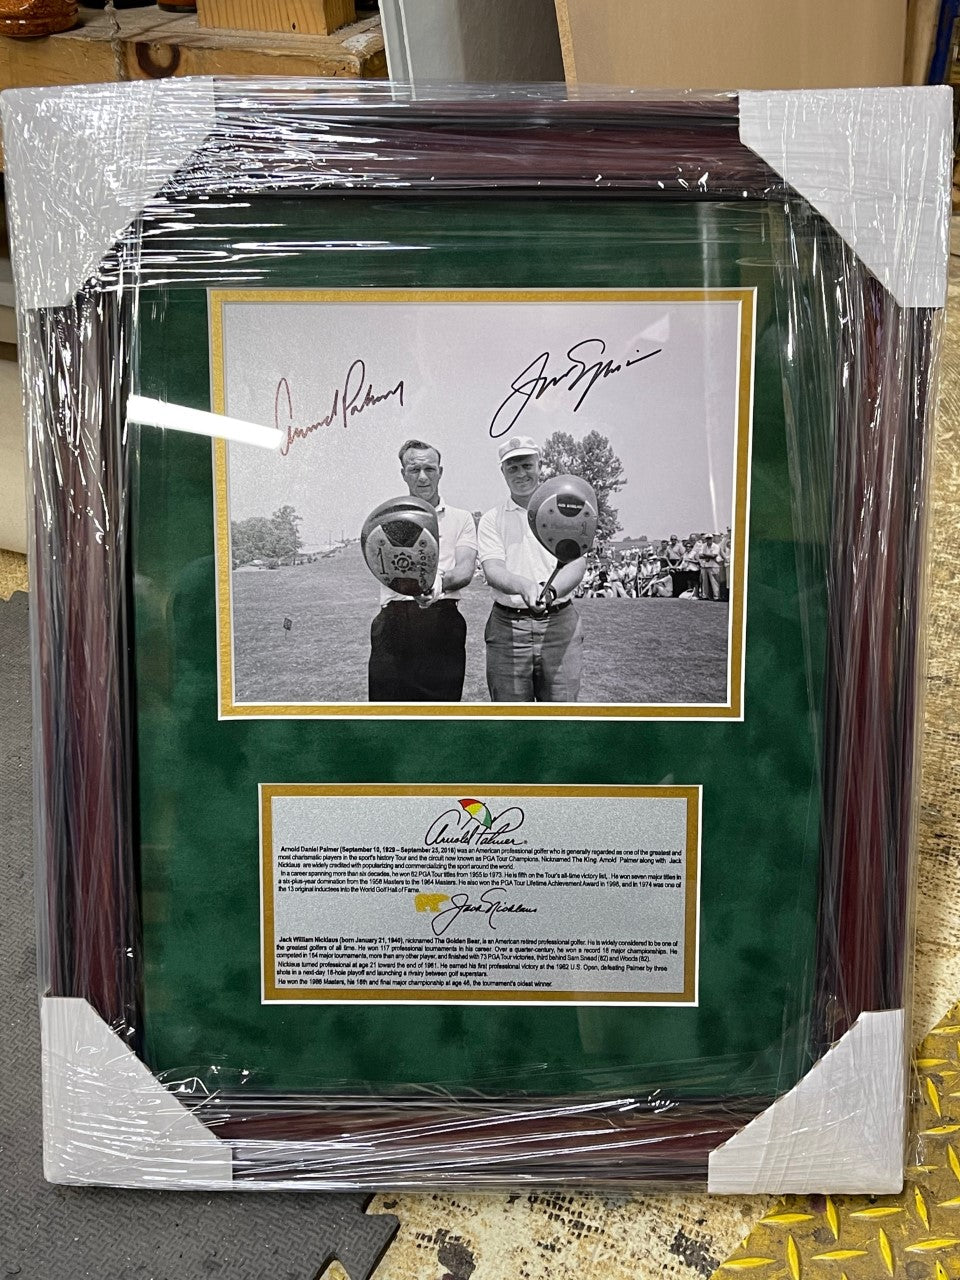 Jack Nicklaus 8 x 10 photo signed with proof